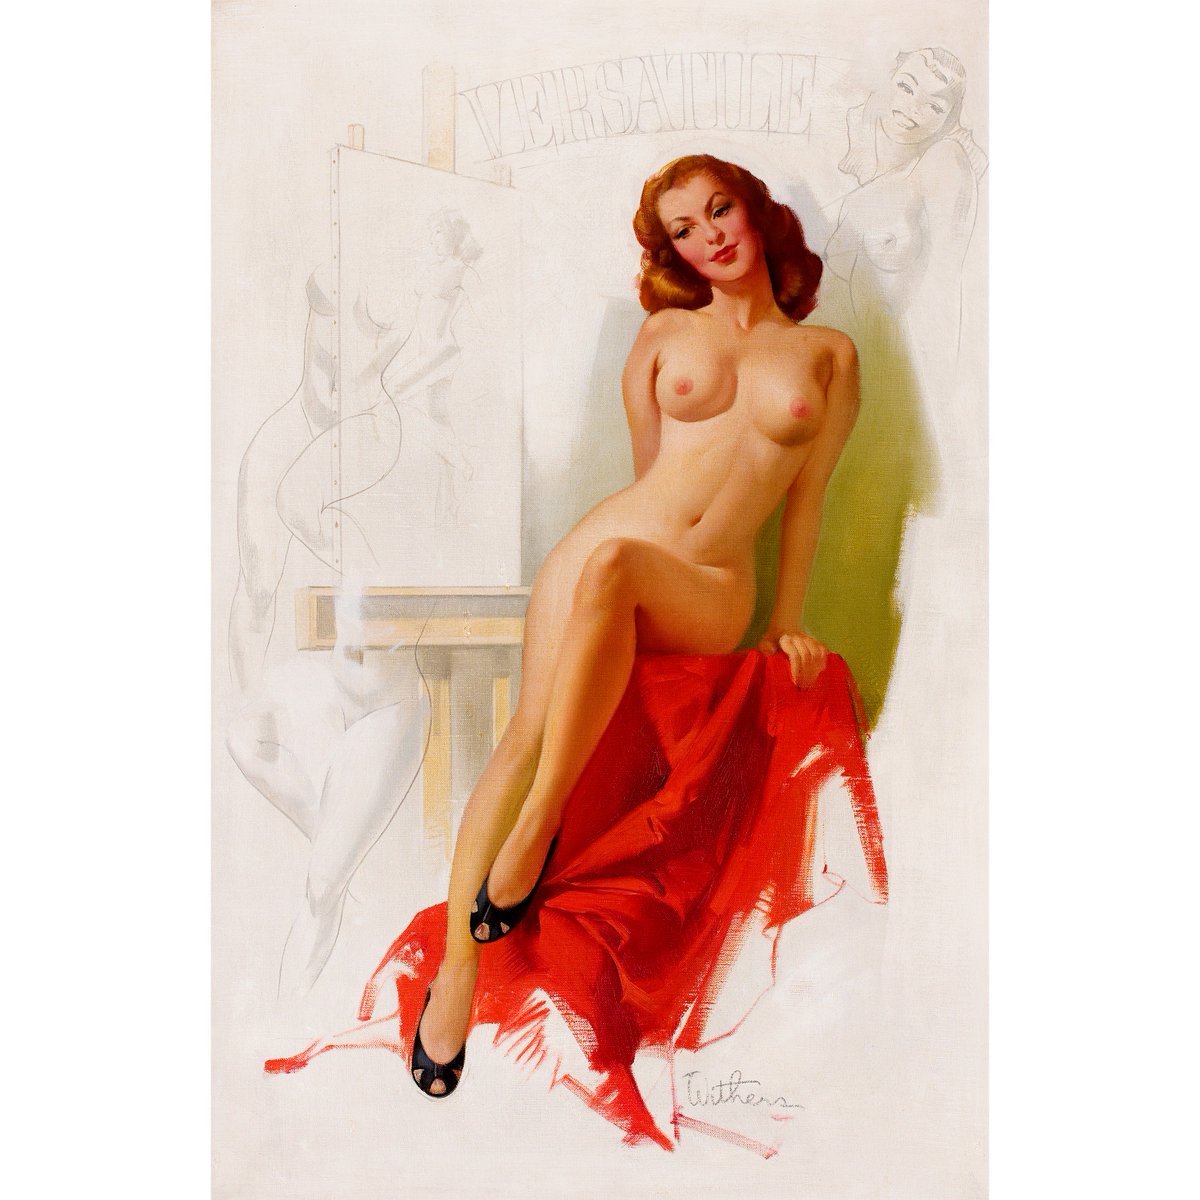 2018-04-21 11:24:58 Ted Withers 'Versatile Pin-up' Oil on canvas ...